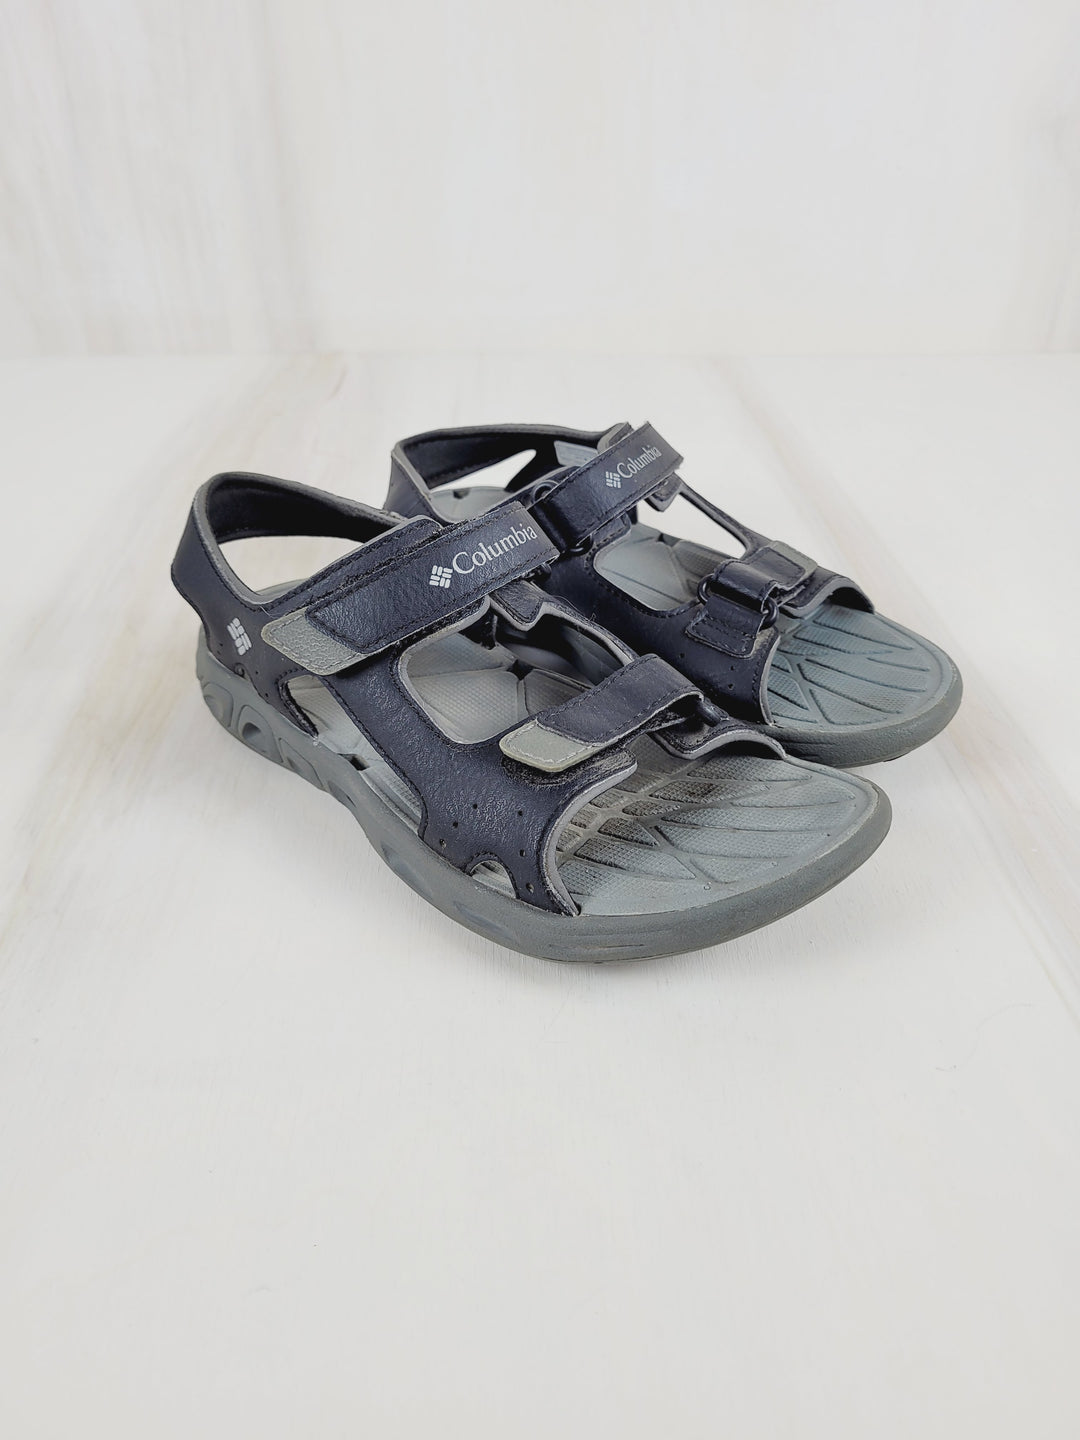 COLUMBIA GREY AND BLACK SANDALS SIZE 2 YOUTH VGUC/EUC